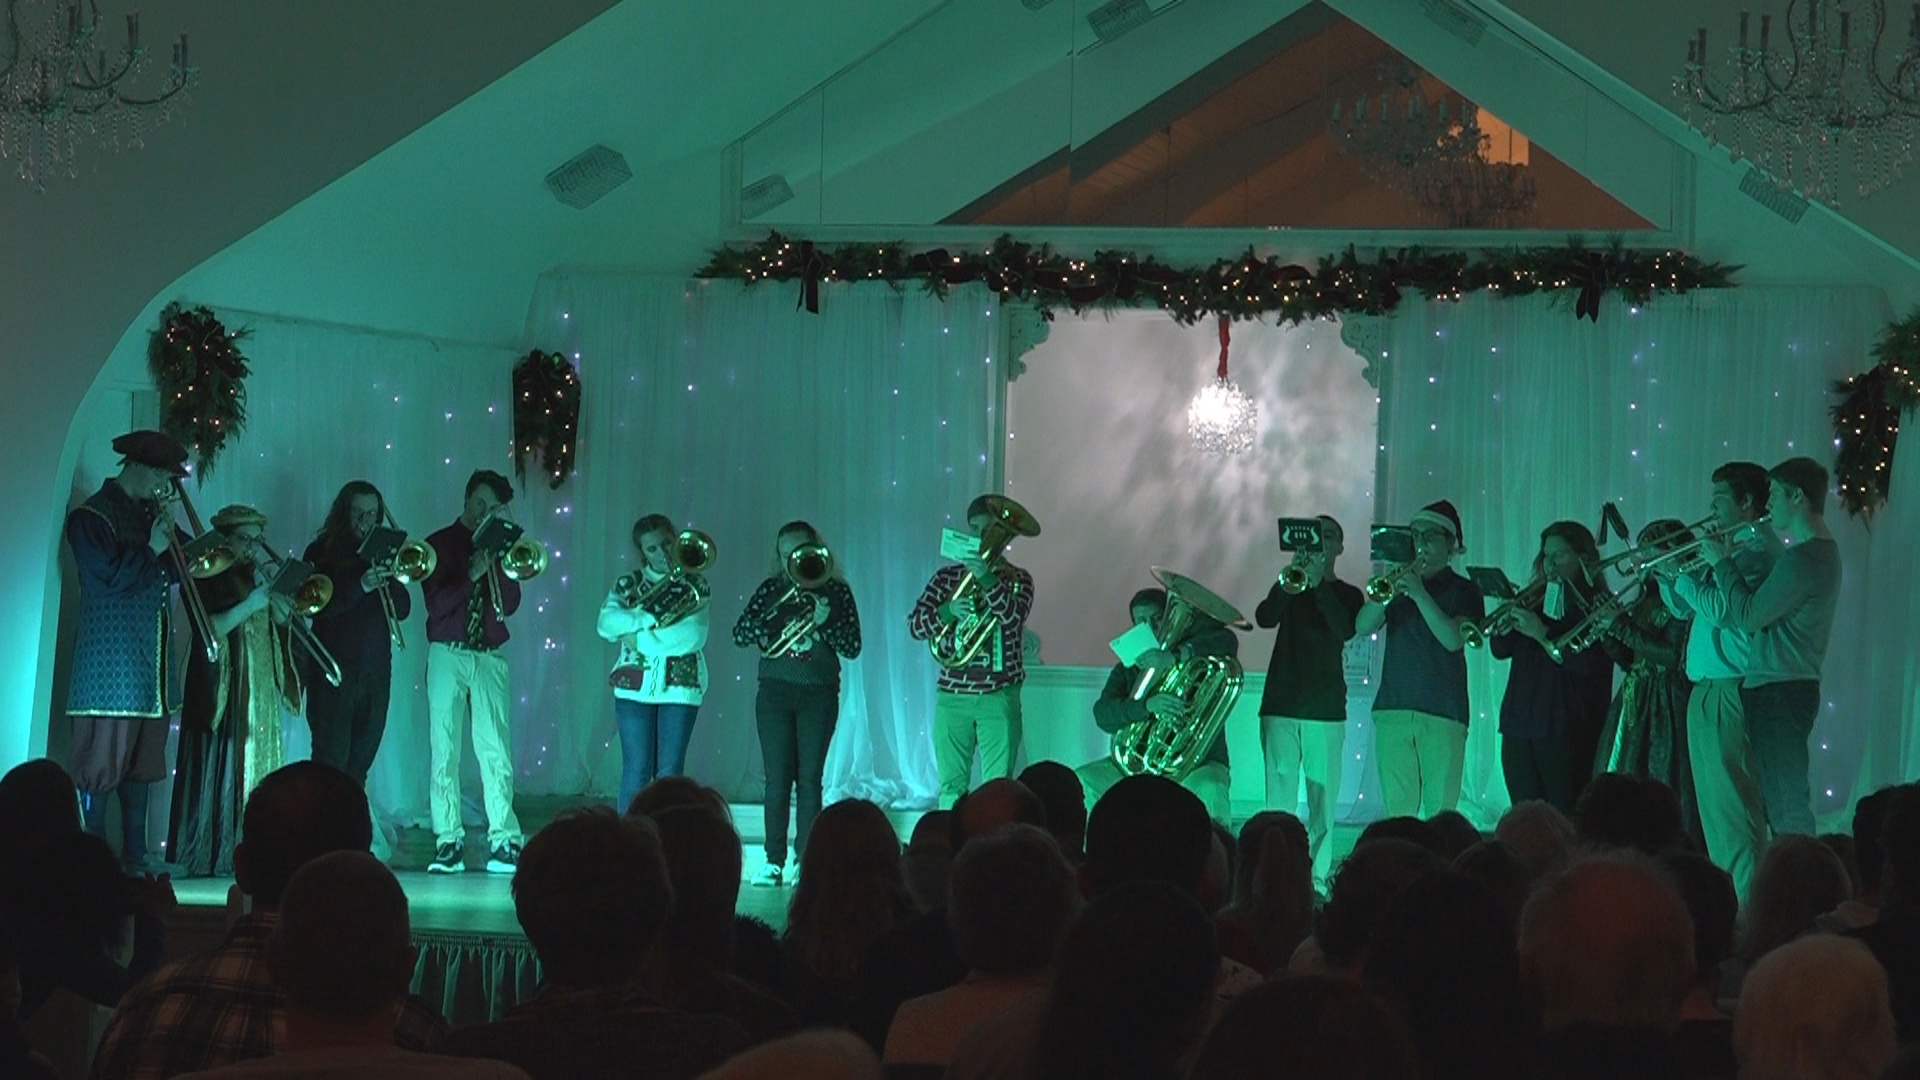 brass band performing on stage